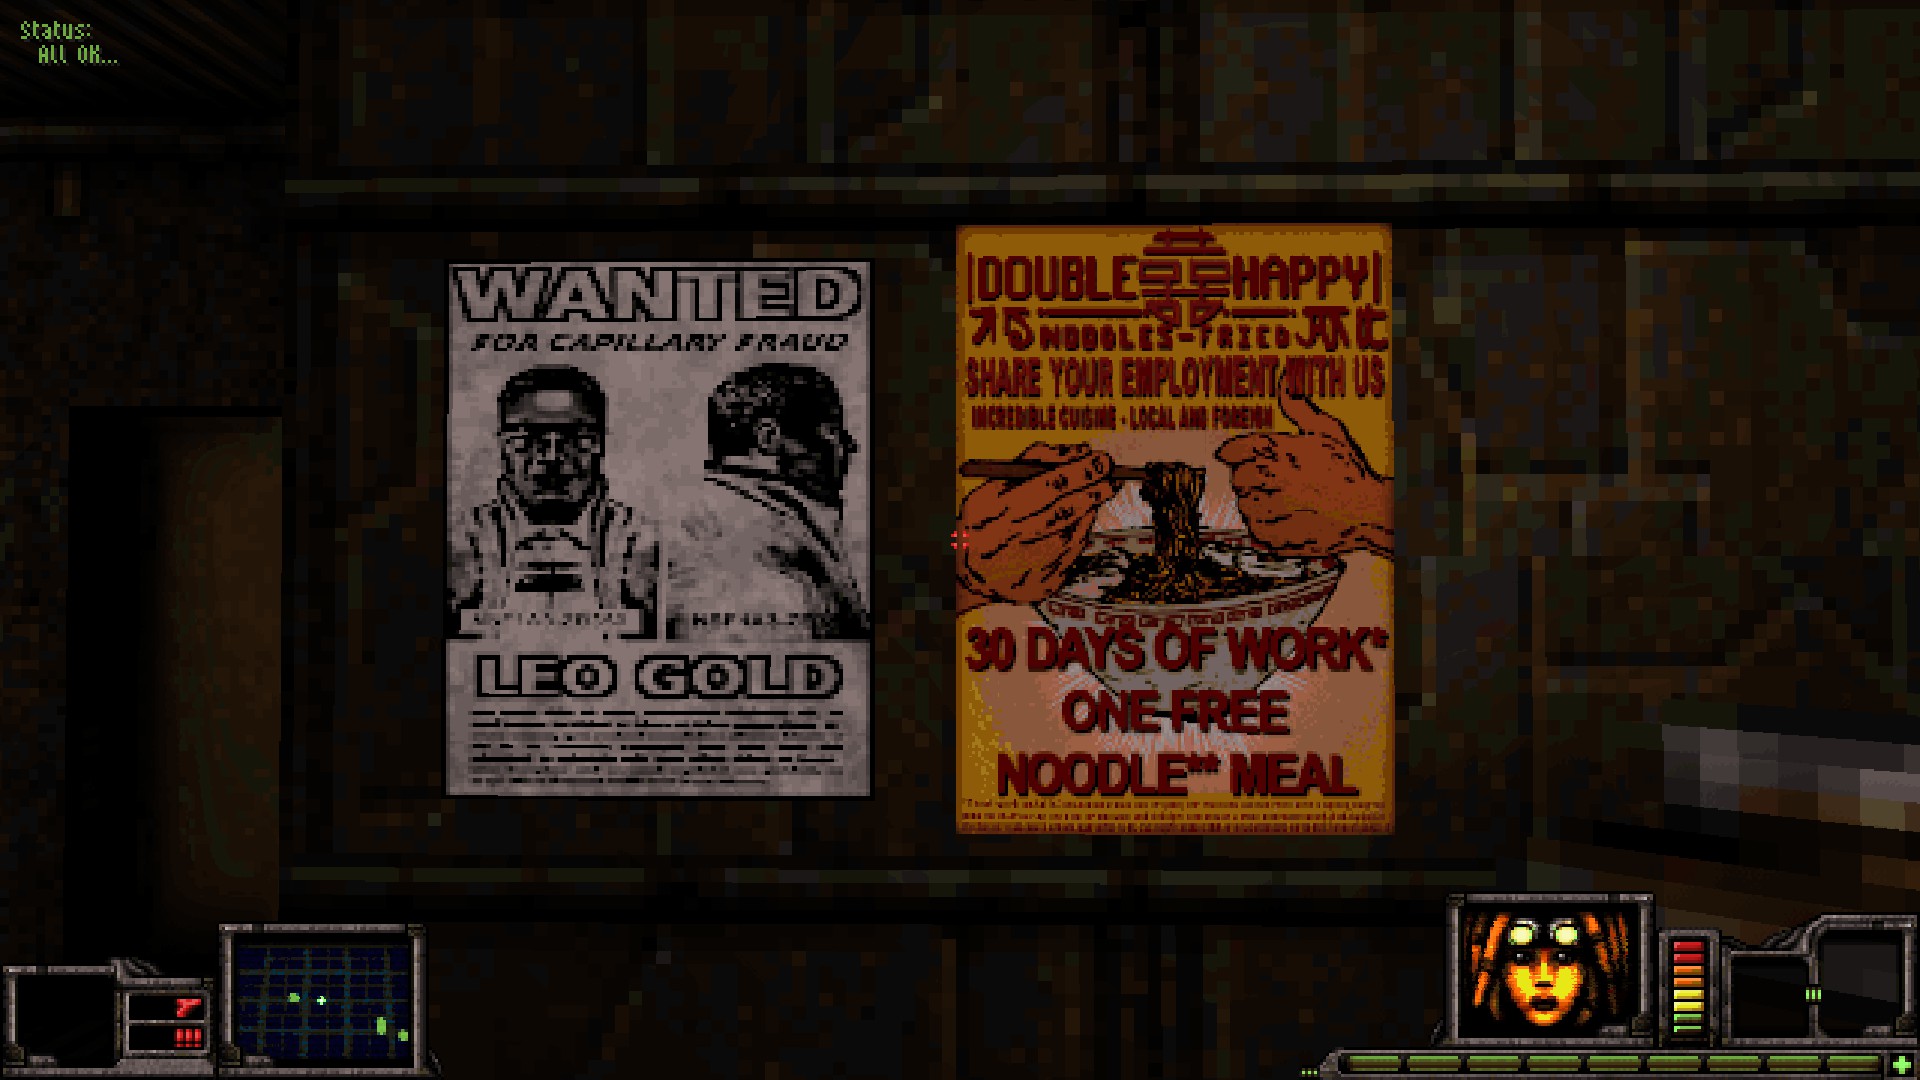 Deus Ex ref Run for Fortune: Wanted poster "Leo Gold" The villain in the DX Liberty Island mission